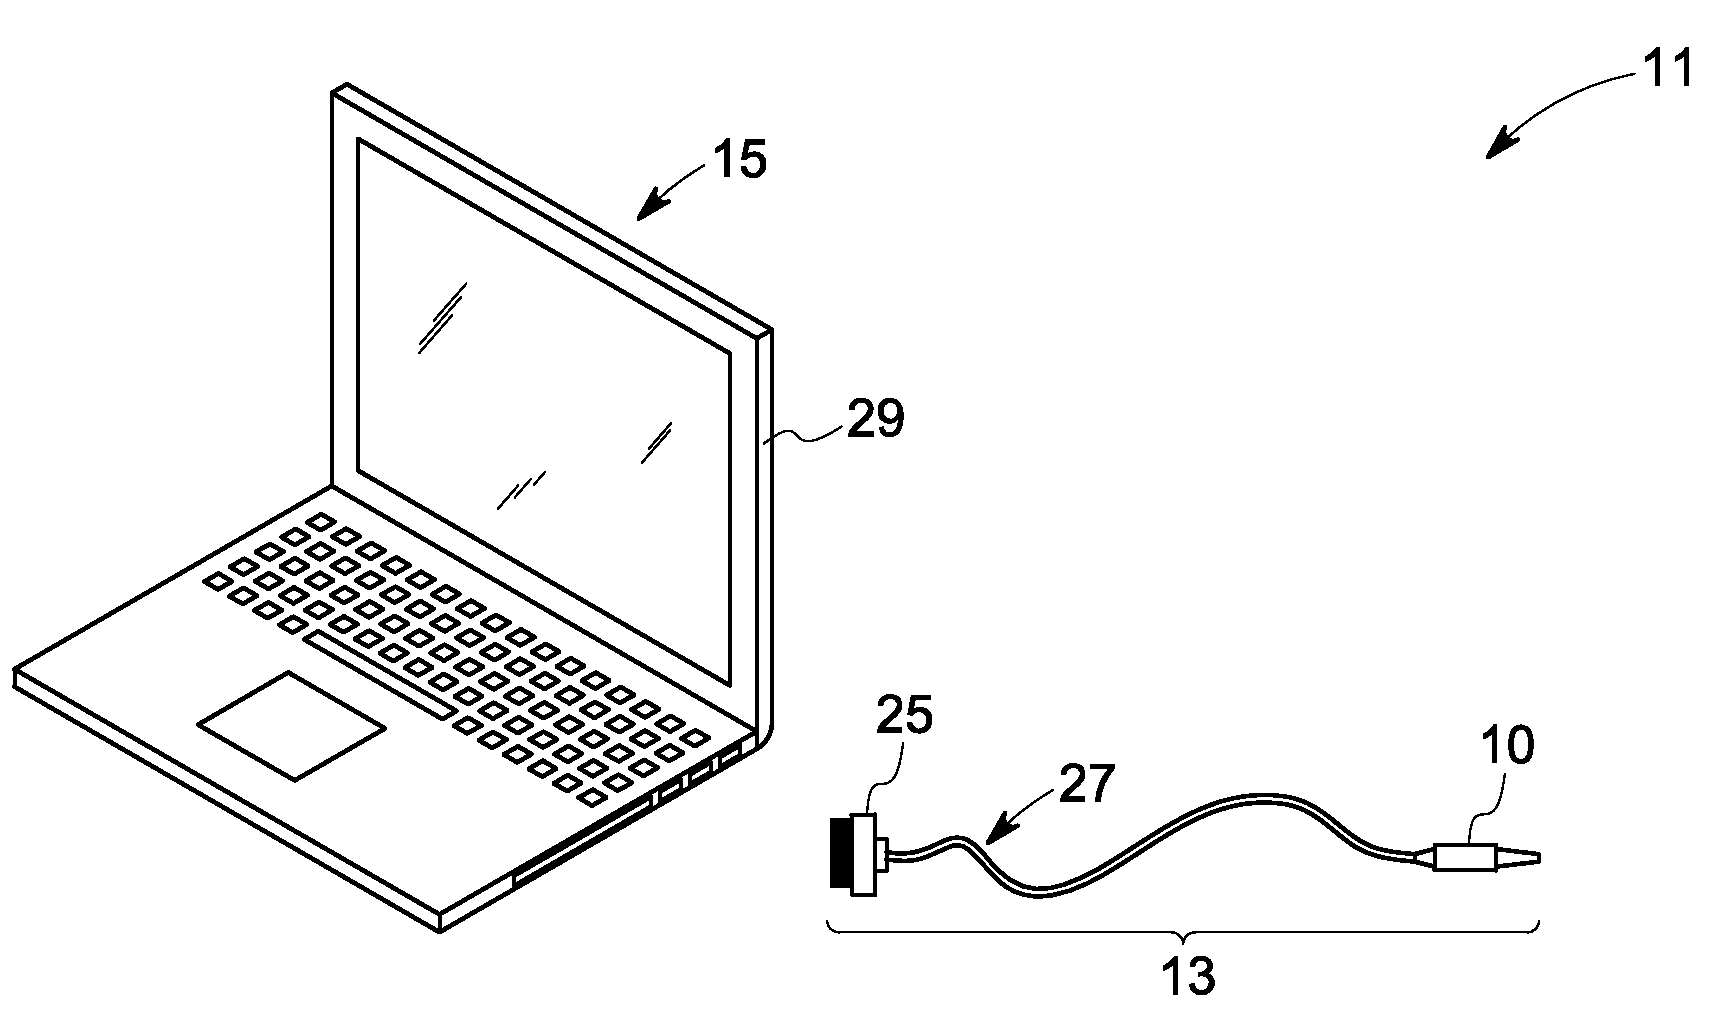 Ultrasound probe with replaceable head portion